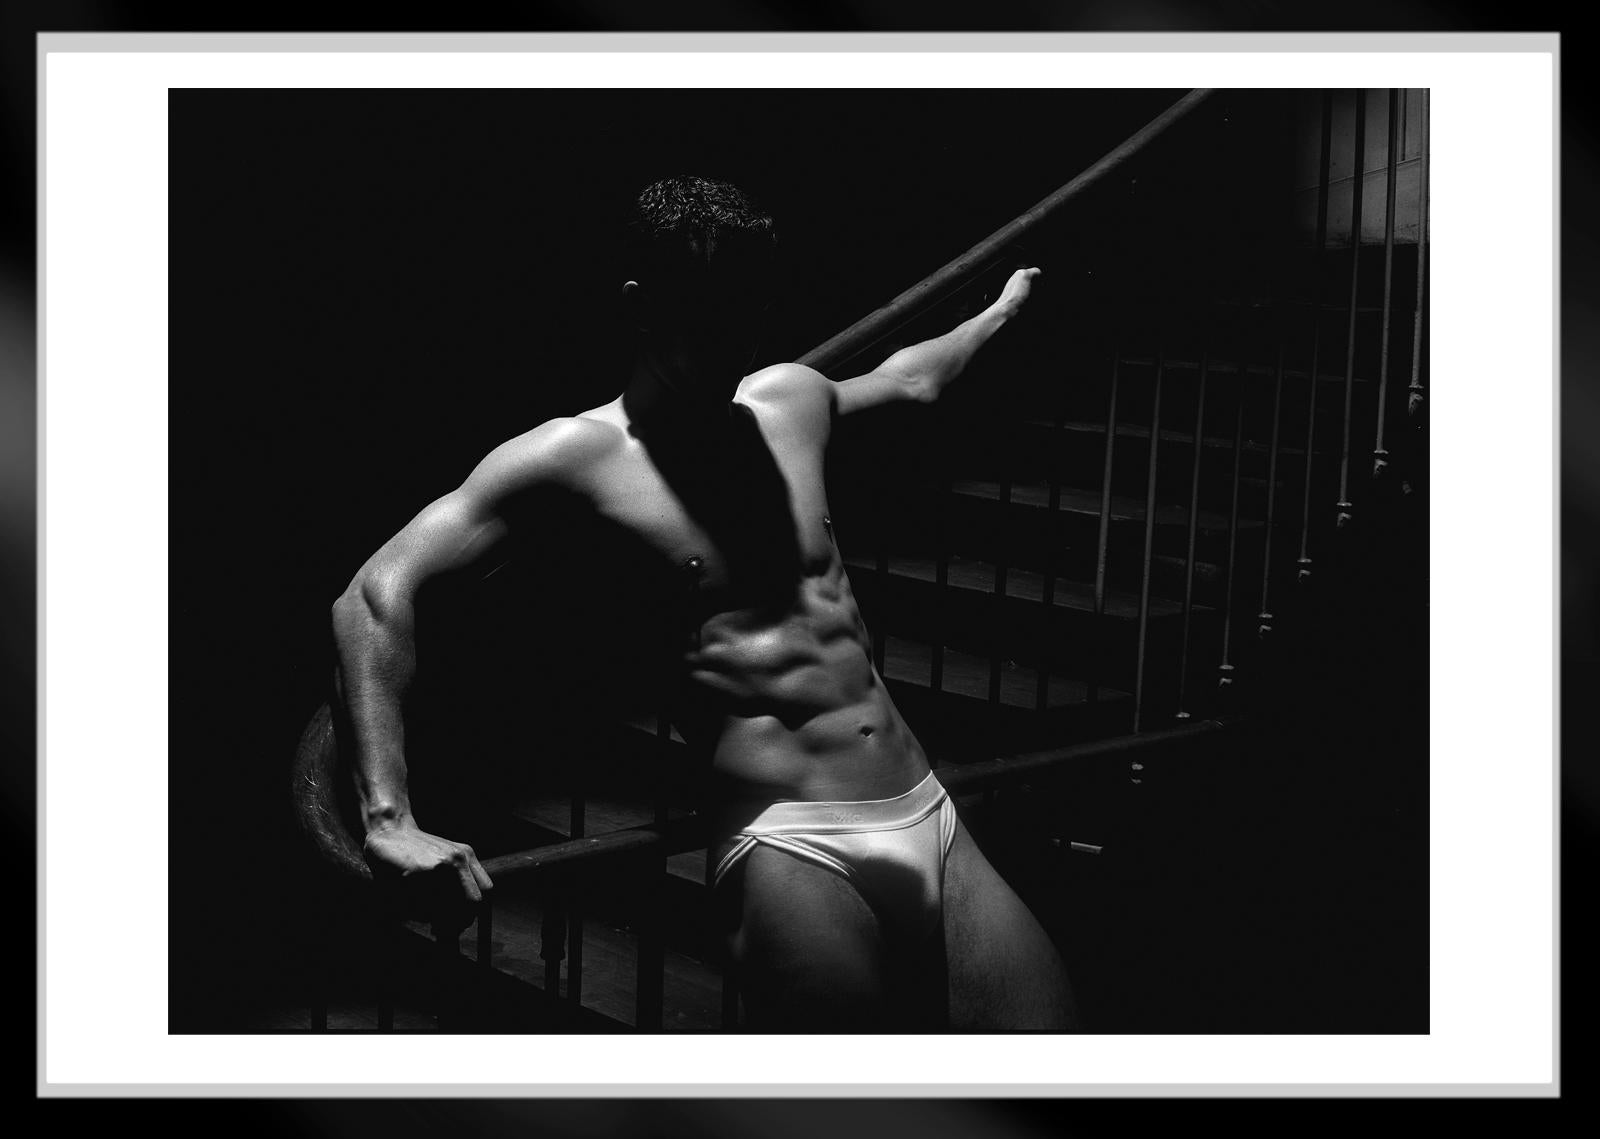 Ben - Signed limited edition fine art print, Black white photo, Homoerotic, Model - Photograph by Ian Sanderson